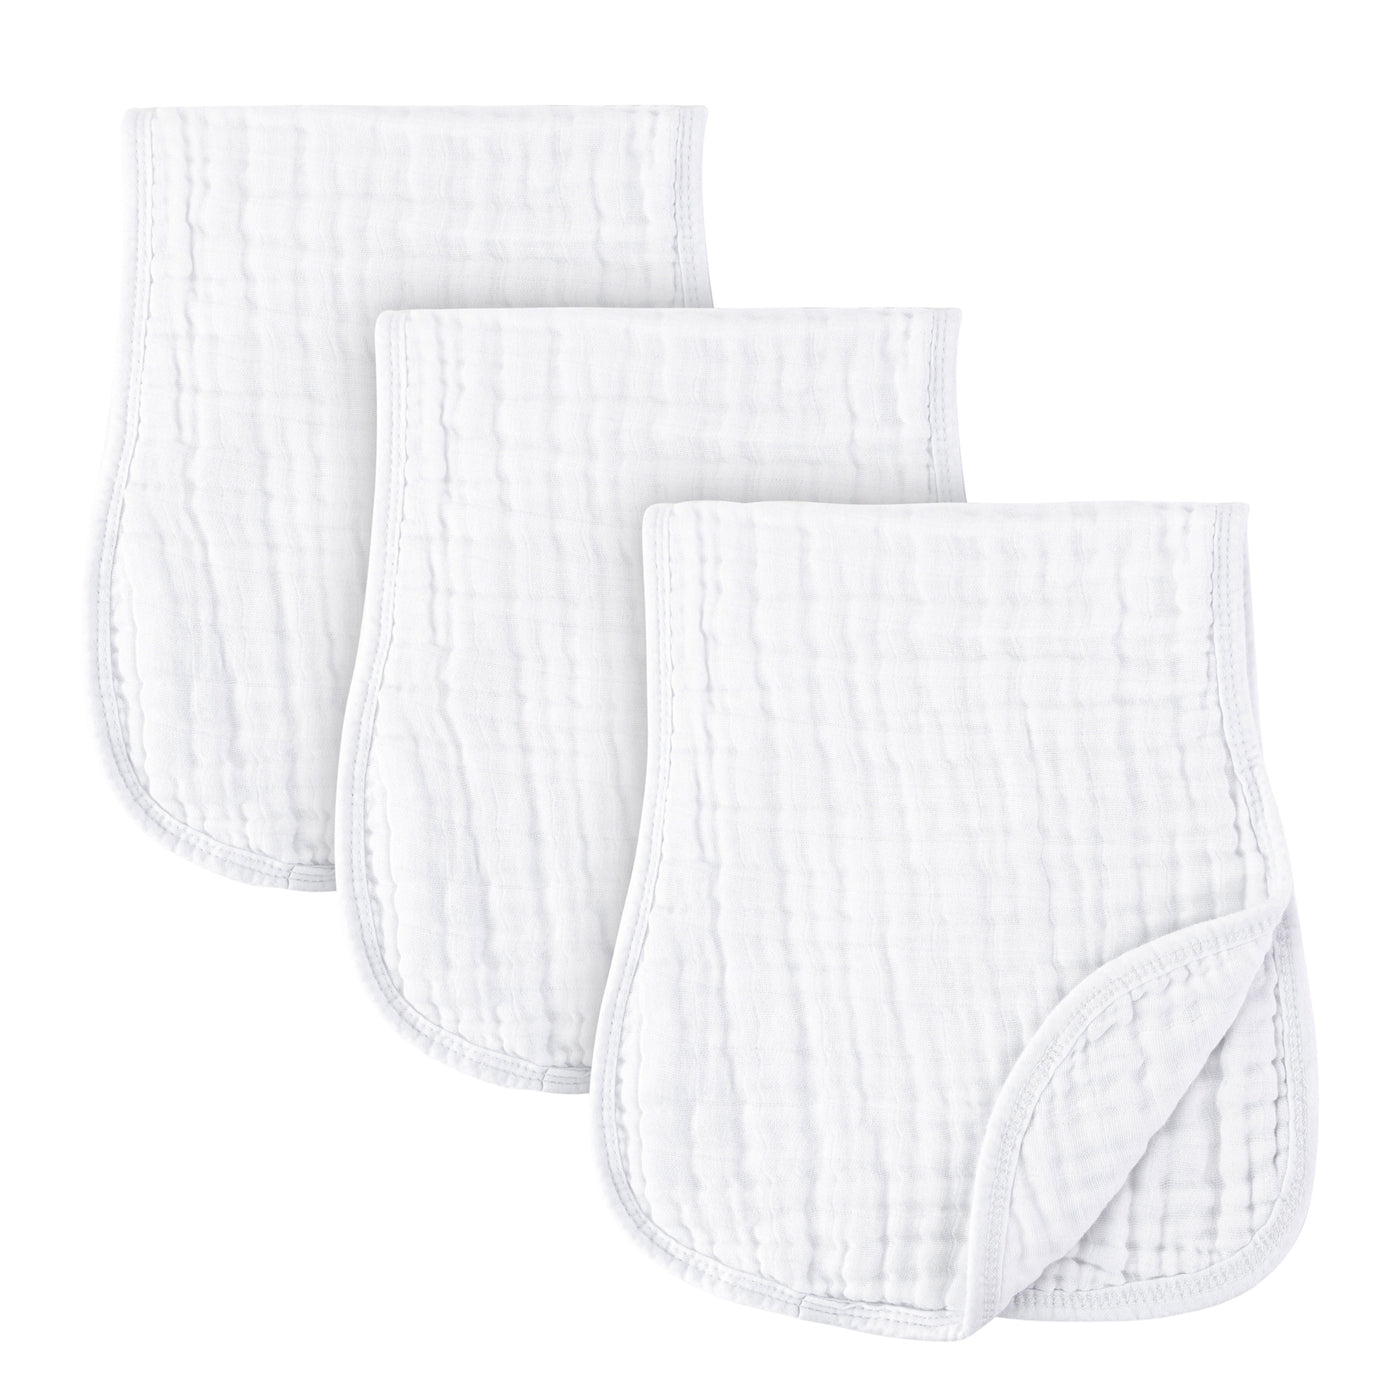 Ely's & Co. Contoured Burp Cloth Three Pack - White